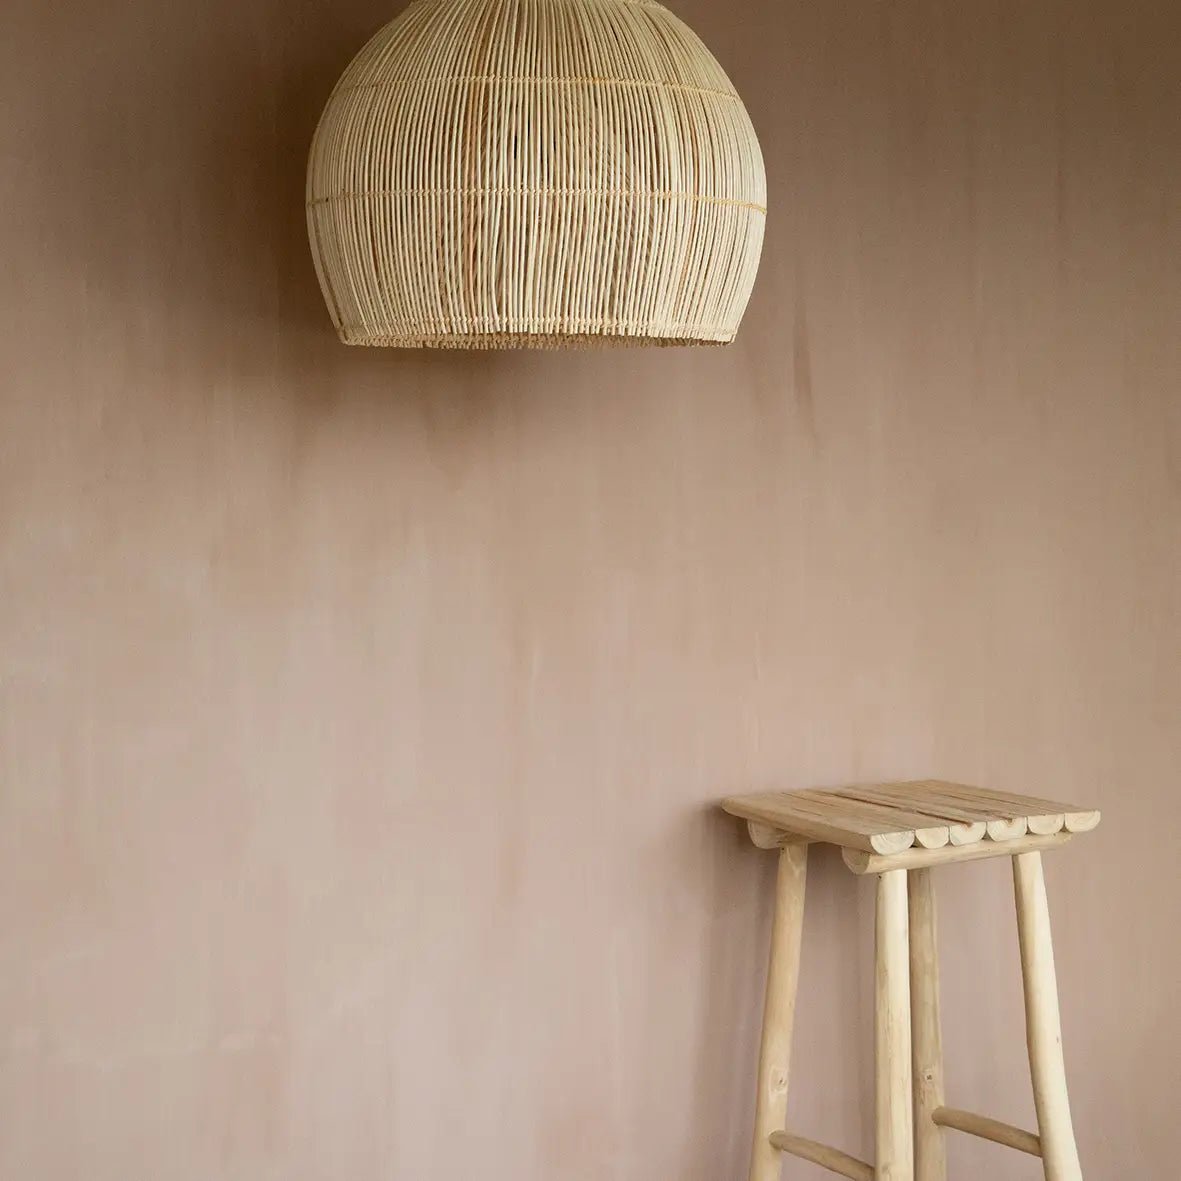 ‘Lobster Trap’ Pendant, Large (Natural) - EcoLuxe Furnishings